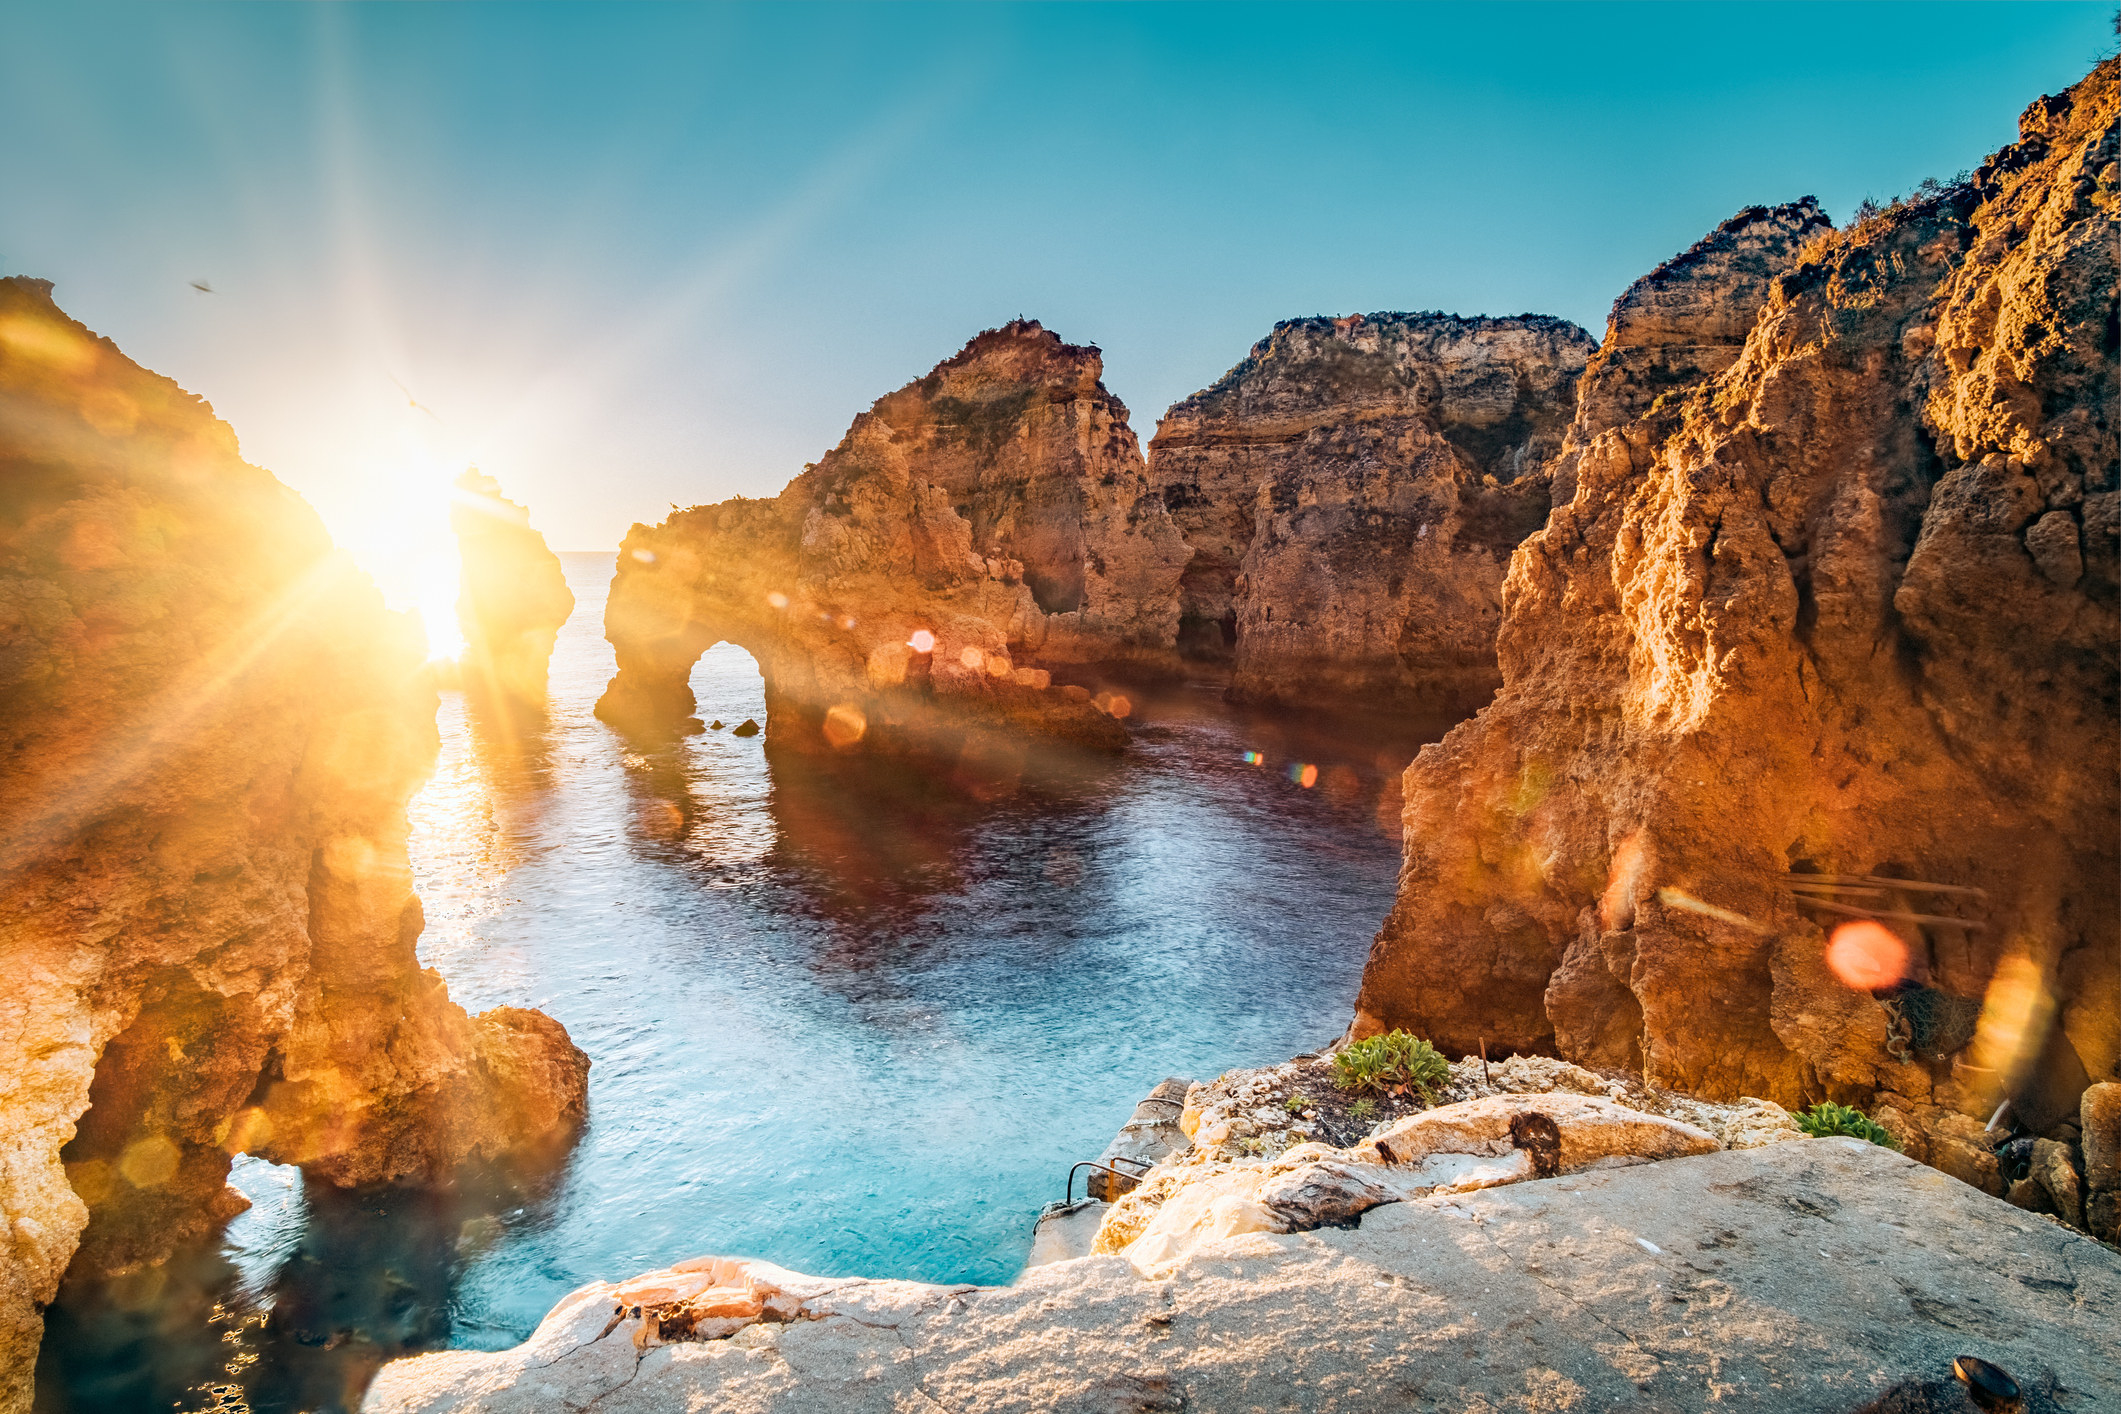 Golden sunrise over cliffs and water.